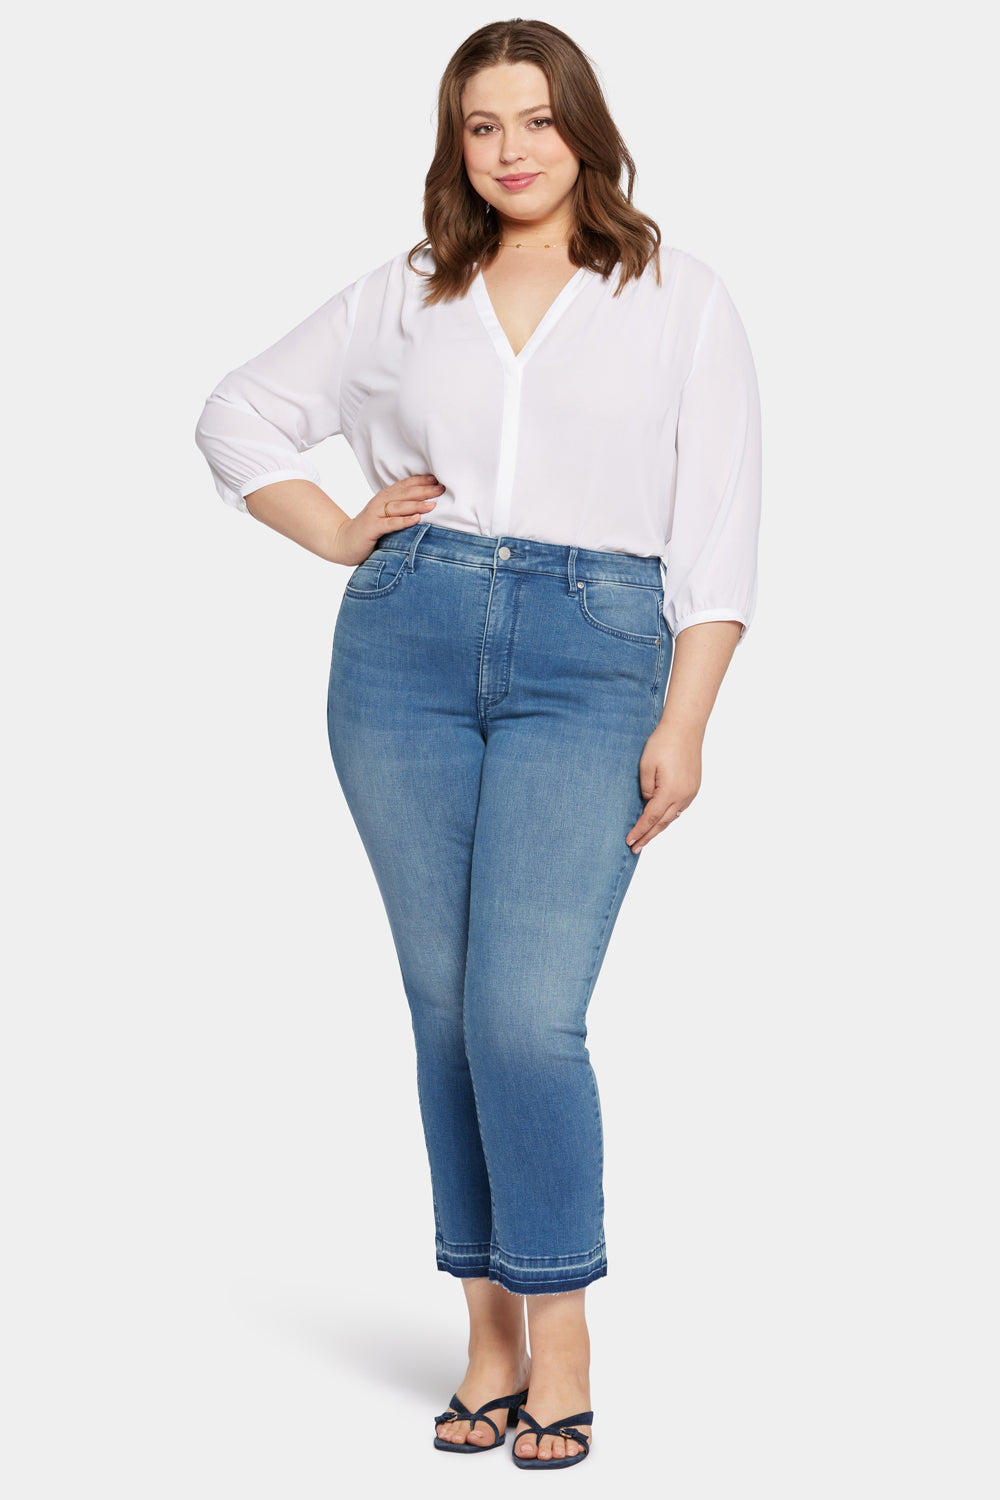 NYDJ Marilyn Straight Ankle Jeans In Petite Plus Size In Cool Embrace® Denim With High Rise And Released Hems - Stunning